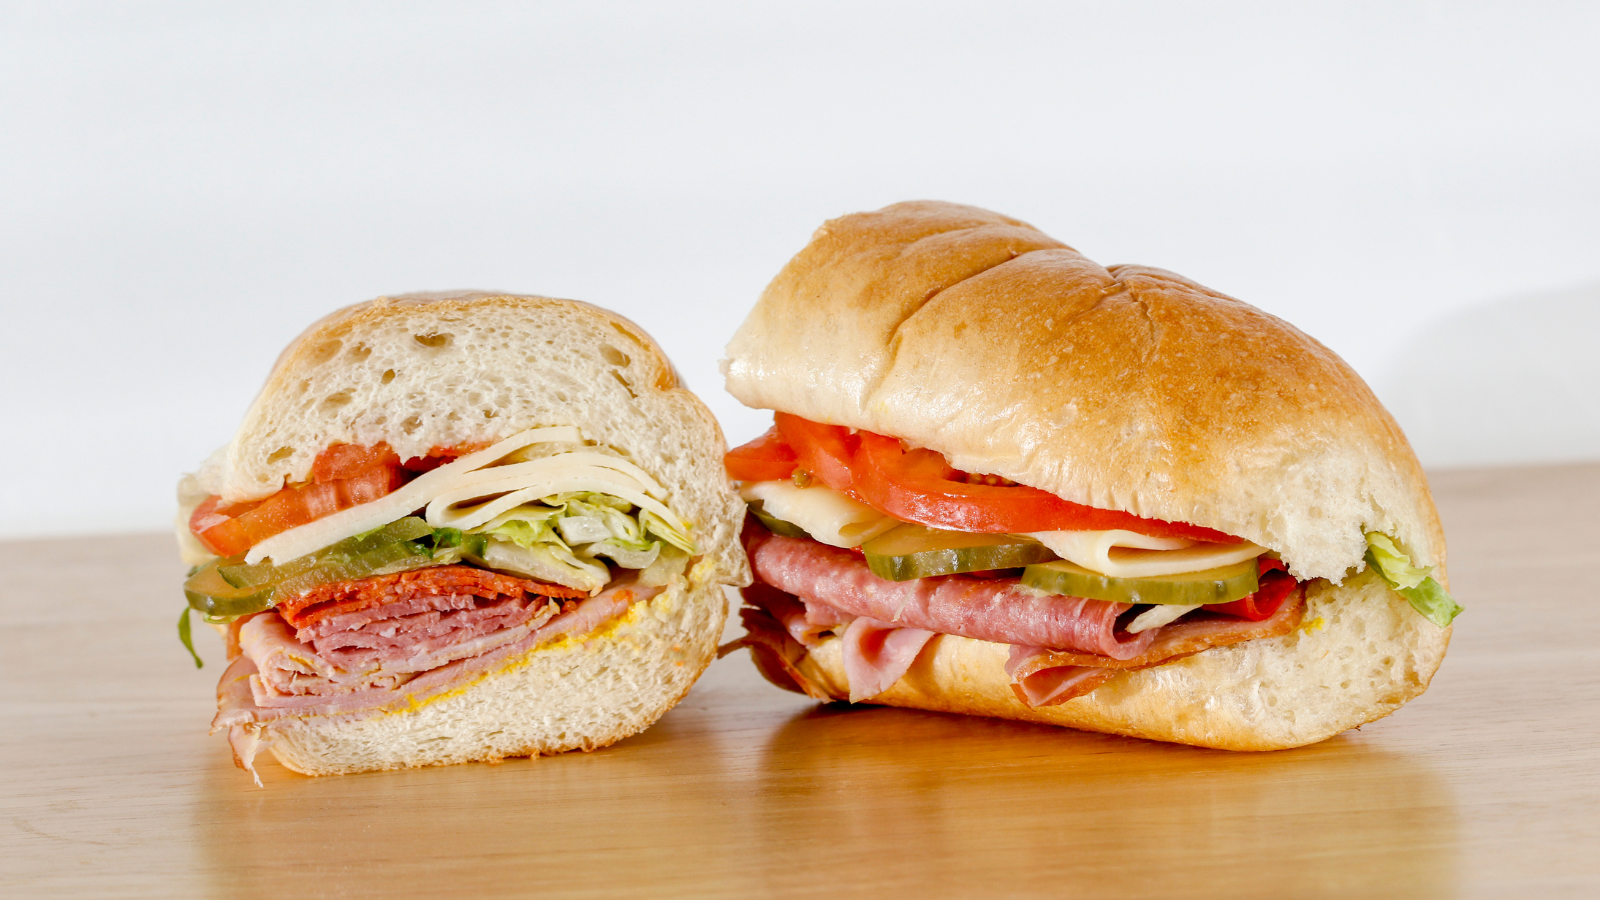 Best Sub Franchises in the USA